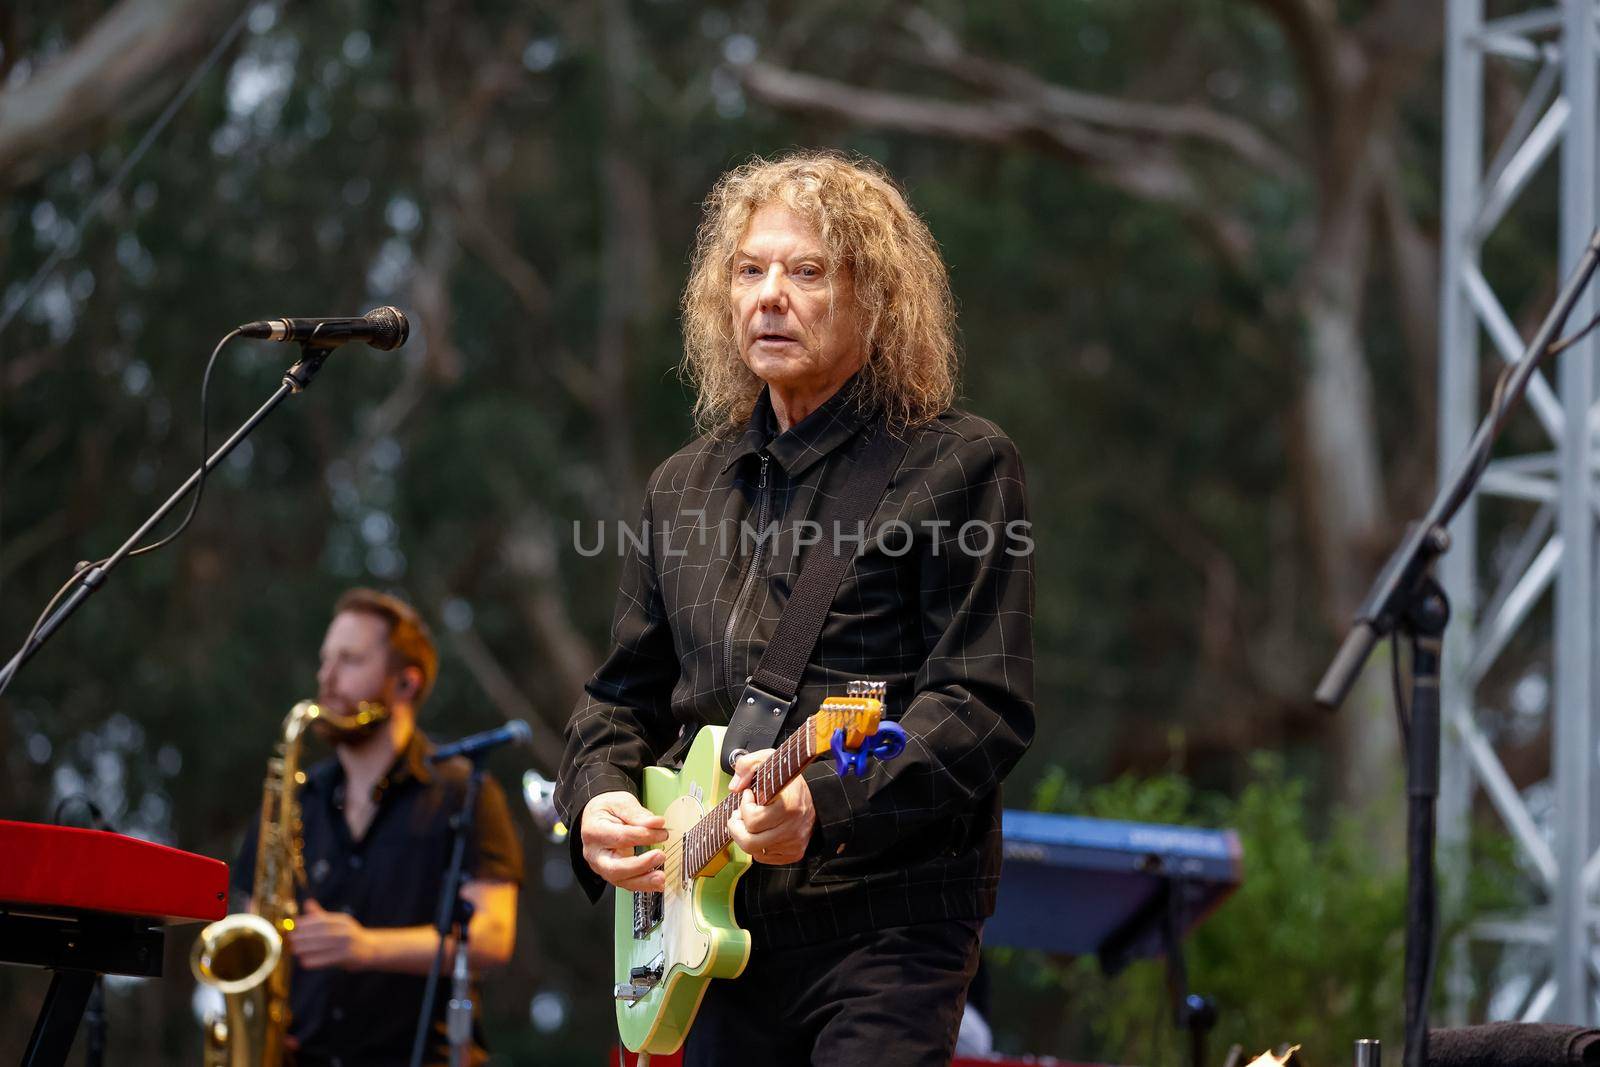 Jerry Harrison at the 2022 Hardly Strictly Bluegrass Festival in Golden Gate Park. by timo043850